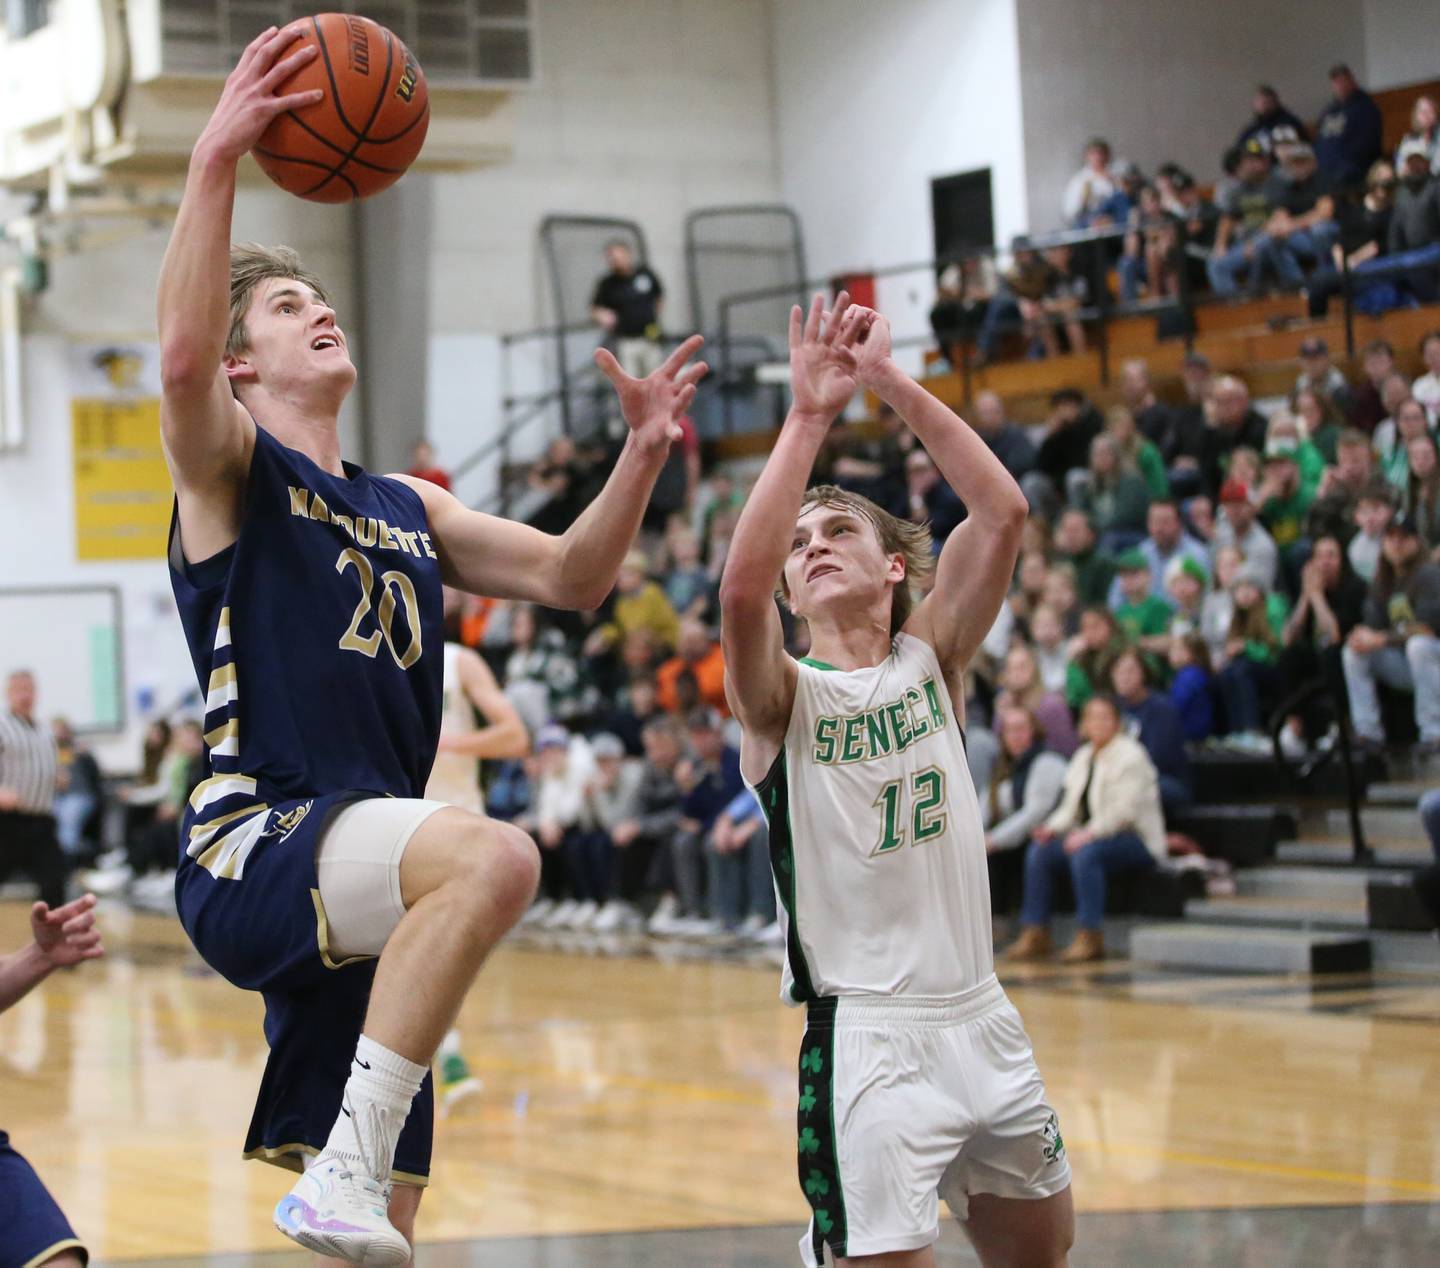 Marquette's Logan Nelson scores a on a drive to the basket over Seneca's Braden Ellis during the Tri-County Conference championship game on Friday, Jan. 27, 2023 at Putnam County High School.